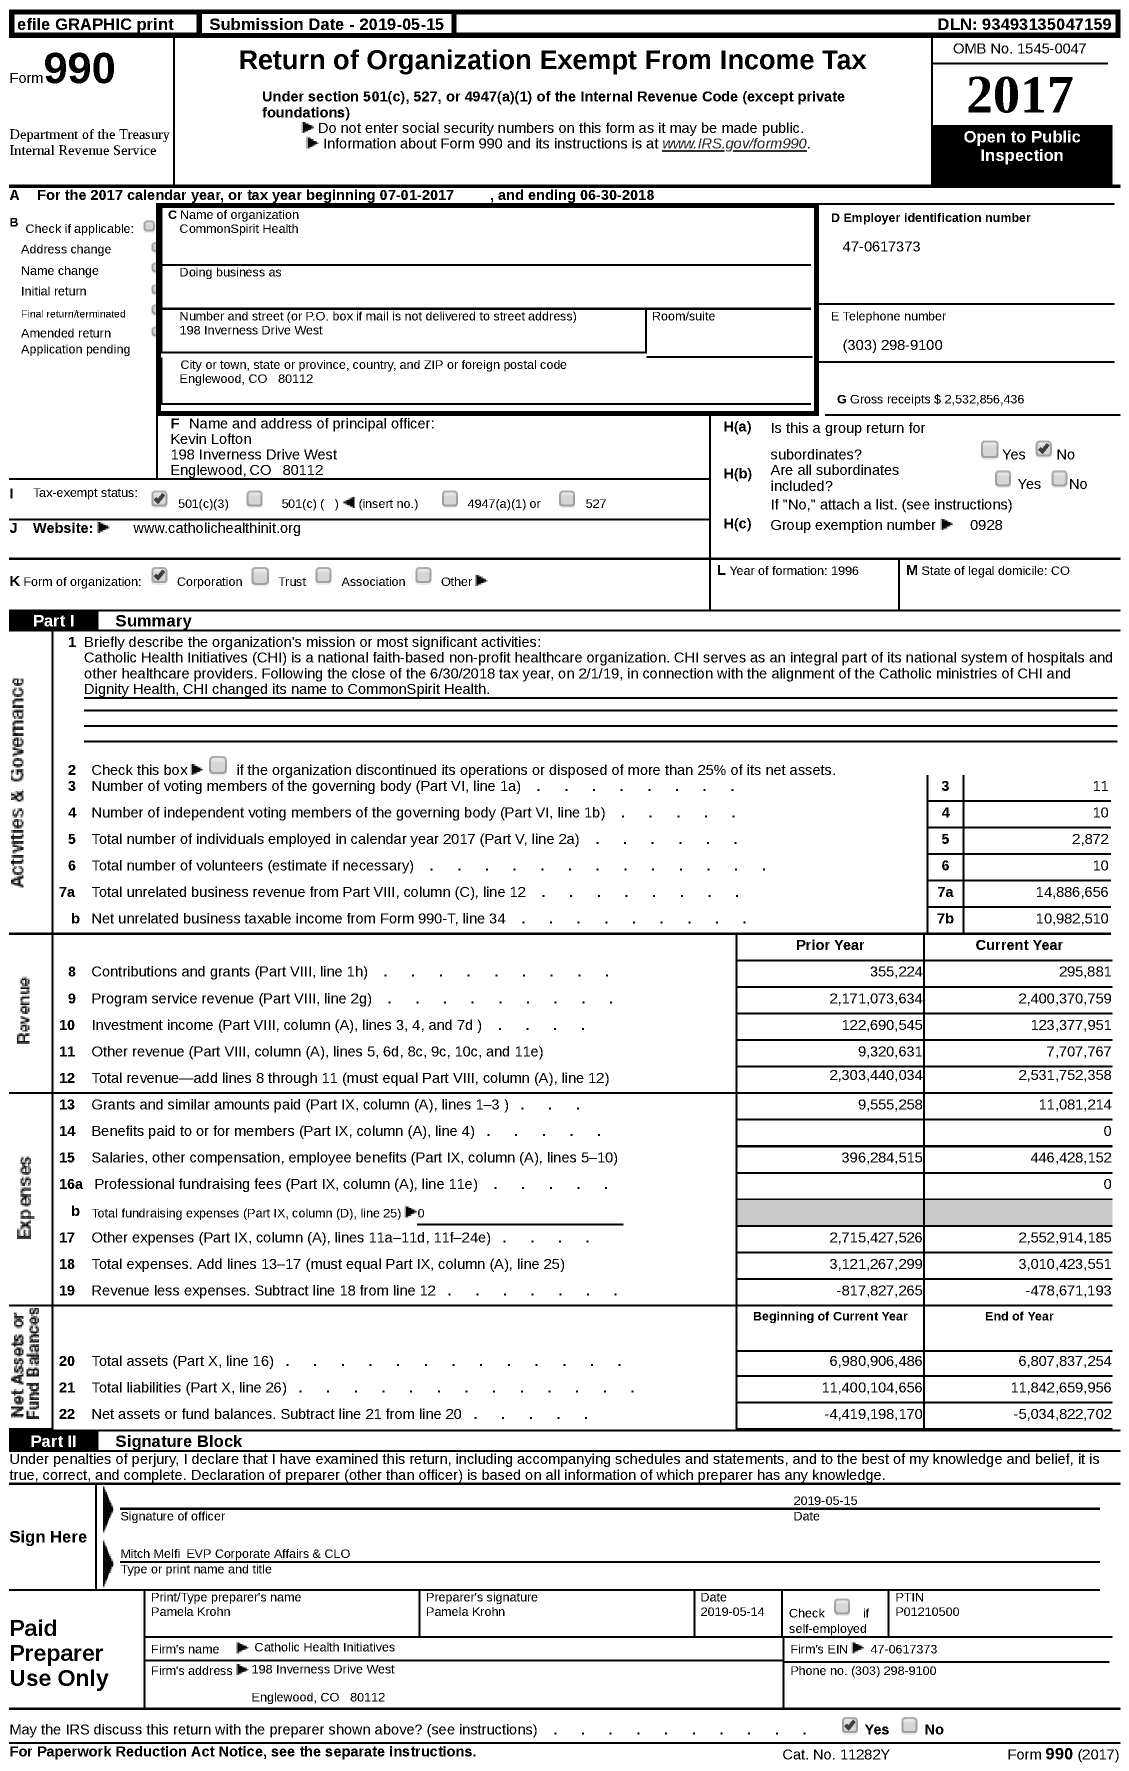 Image of first page of 2017 Form 990 for CommonSpirit Health